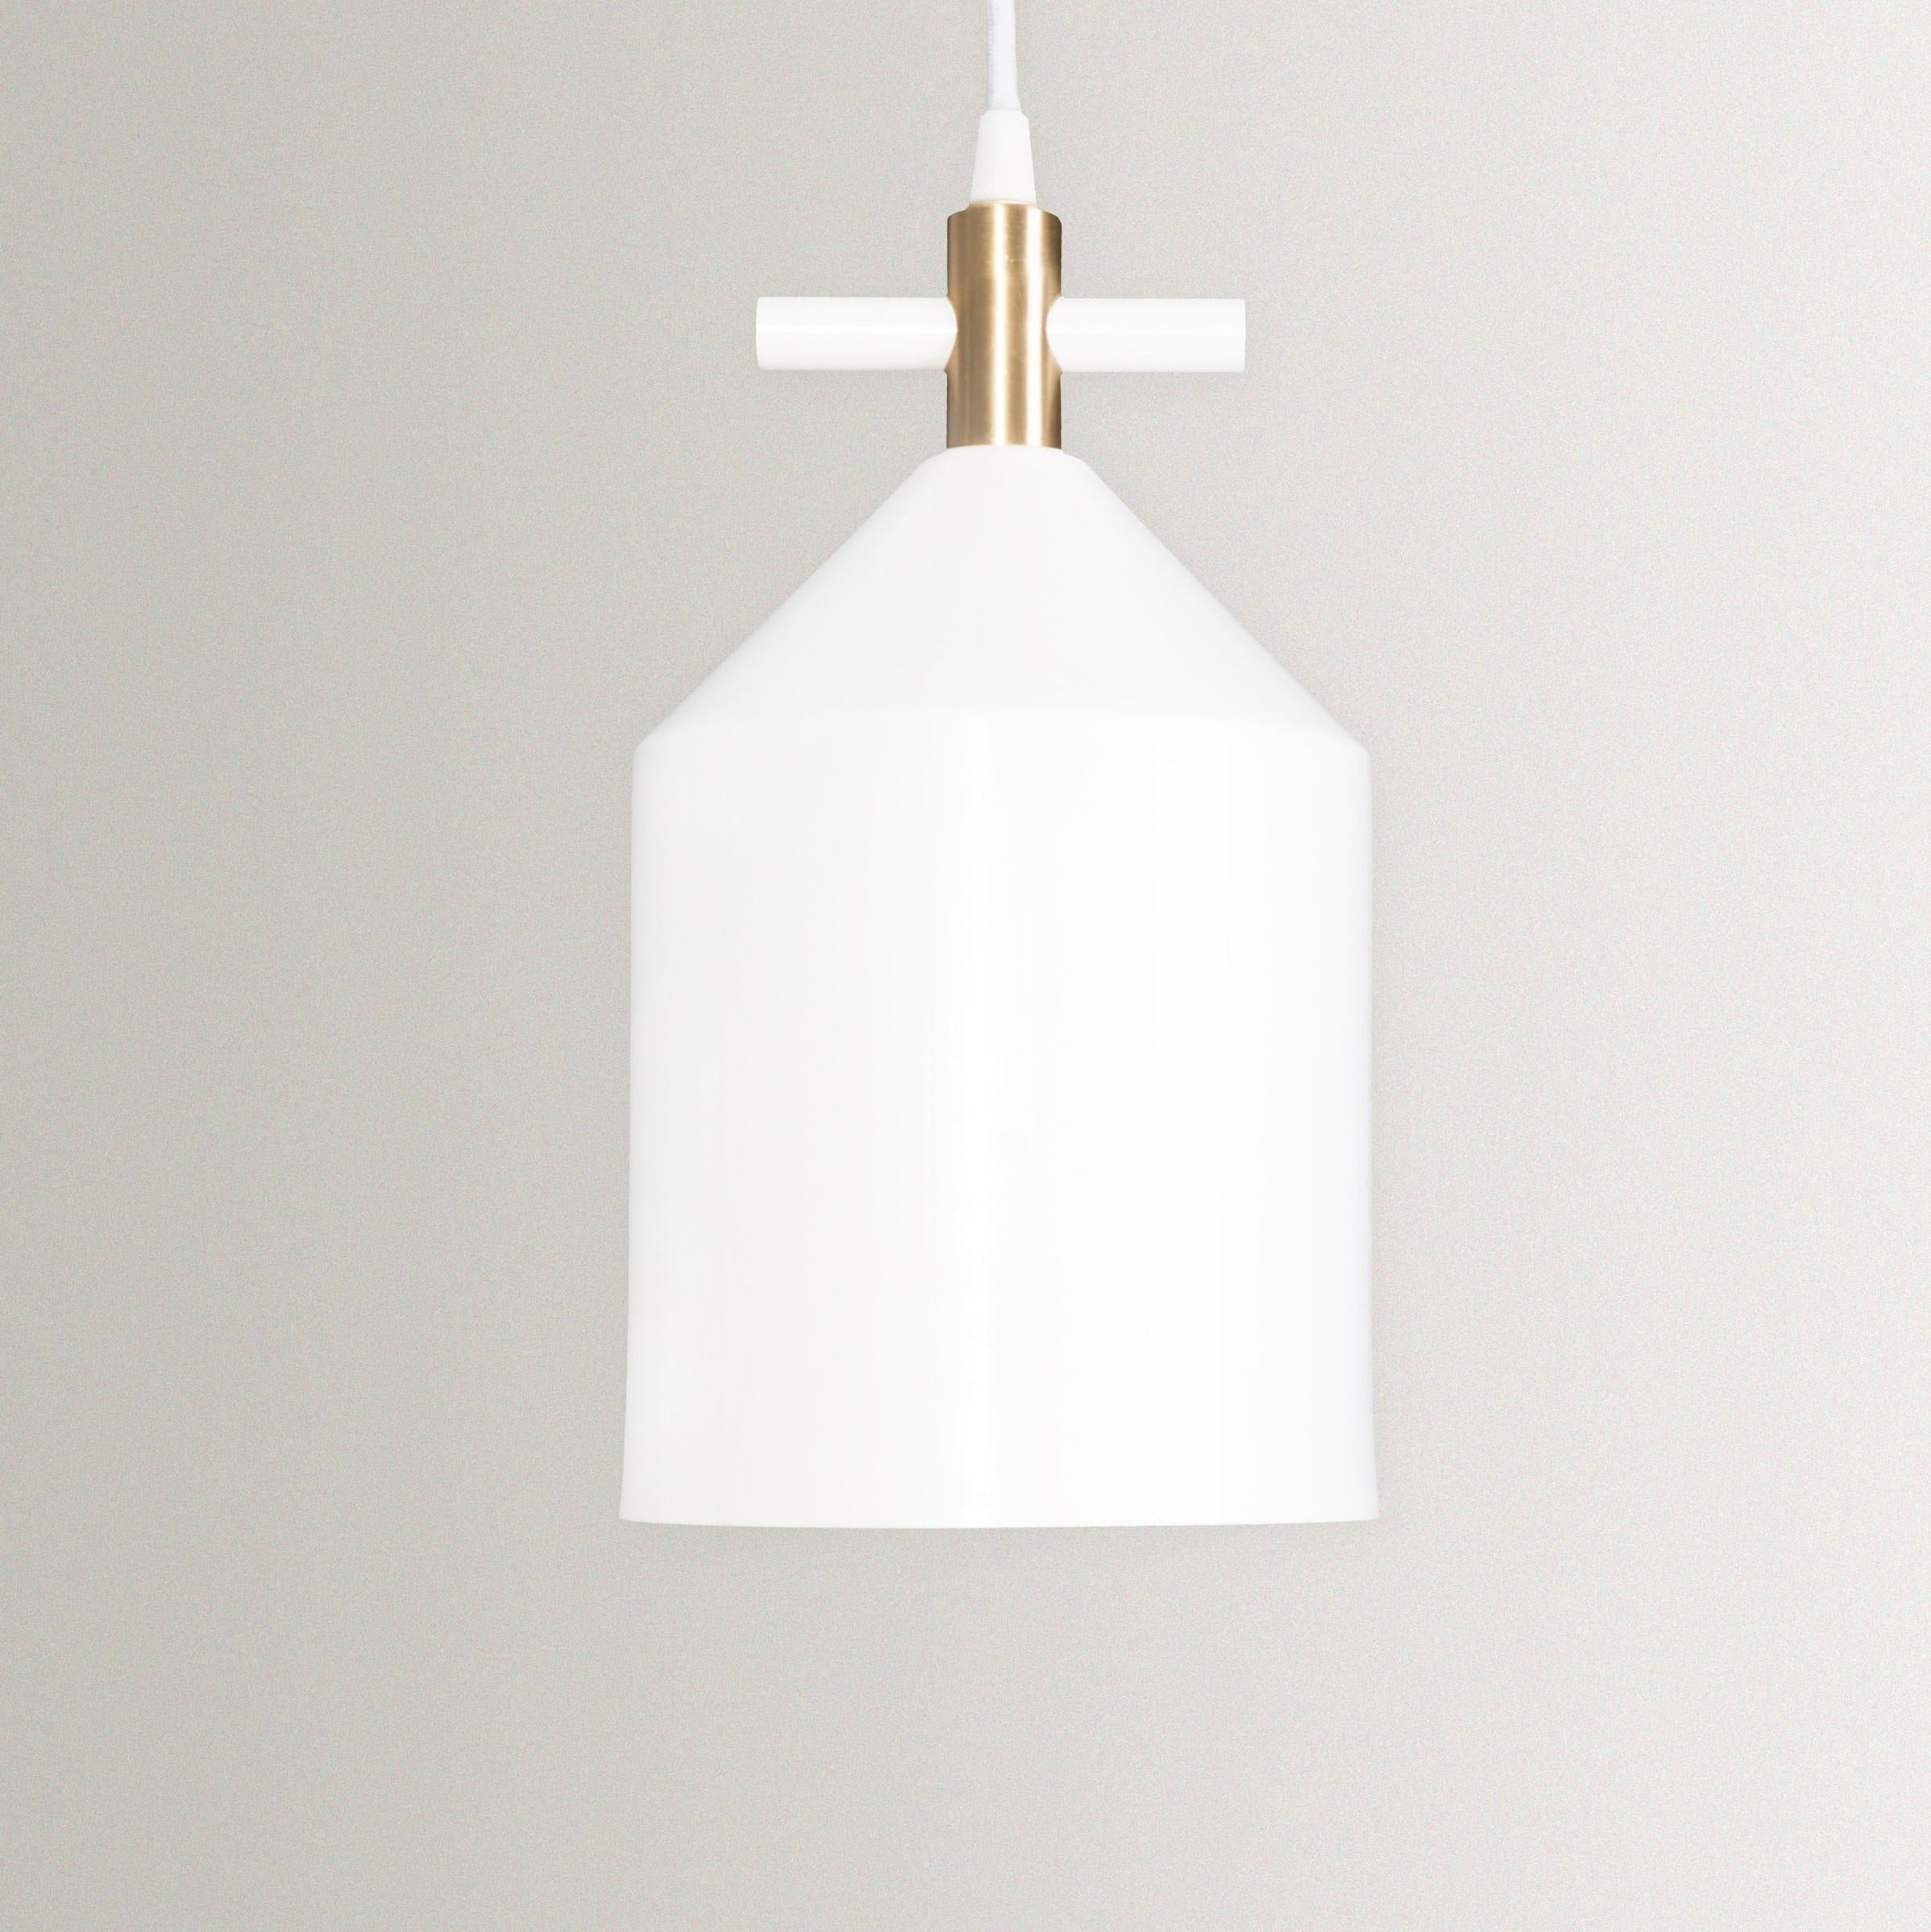 White bell pendant lamp in brass by Hatsu
Dimensions: W 15 x H 27 cm 
Materials: Powdercoated aluminium, brass fabric cord

Hatsu is a design studio based in Mumbai that creates modern lighting that are unique and immediately recognisable. We